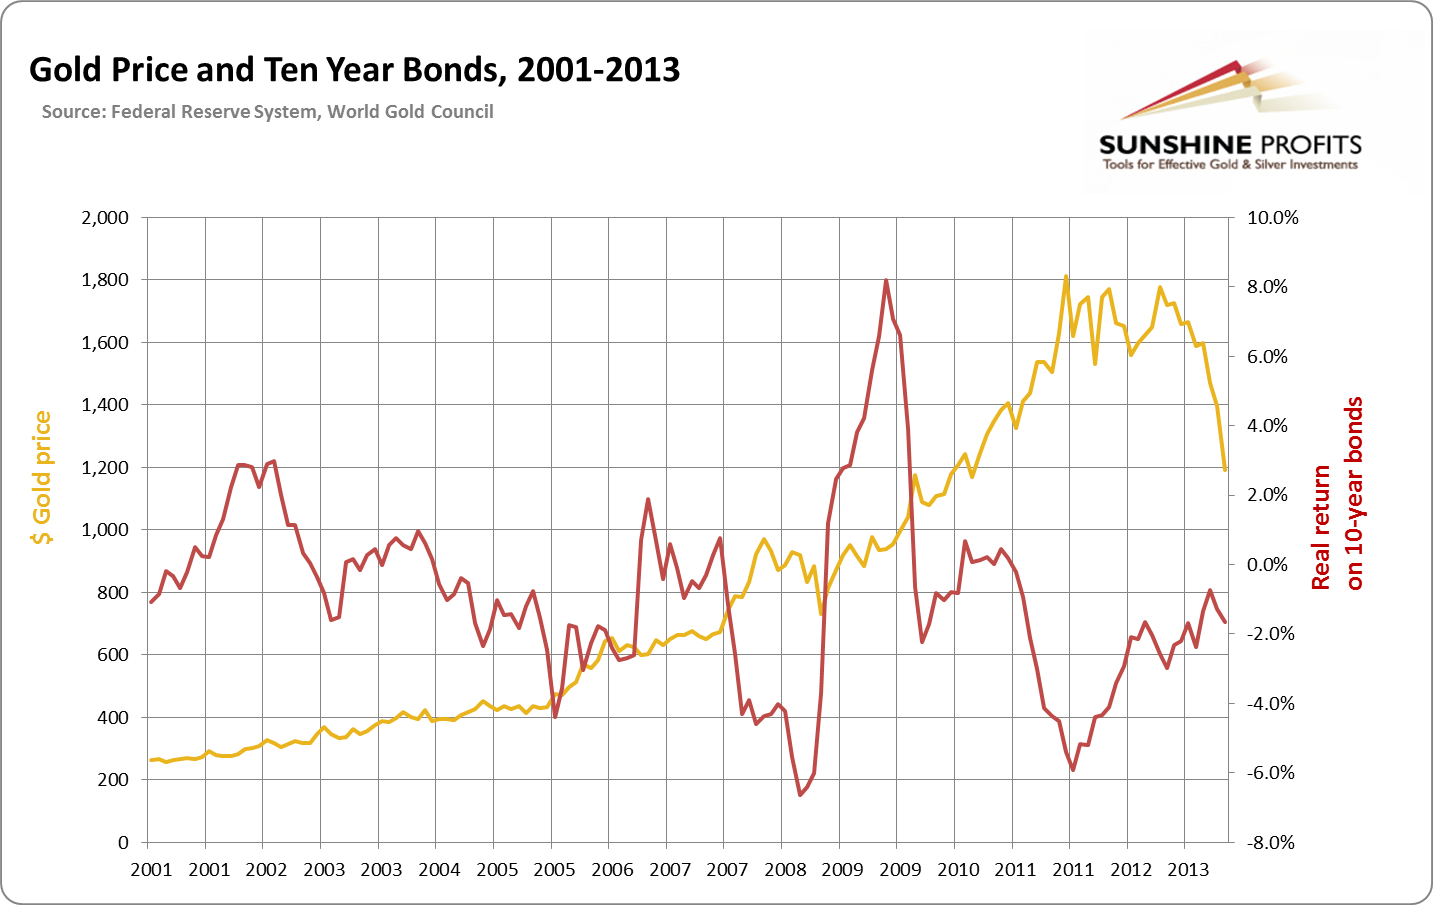 Gold price and Ten Year Bonds, 2001-2013